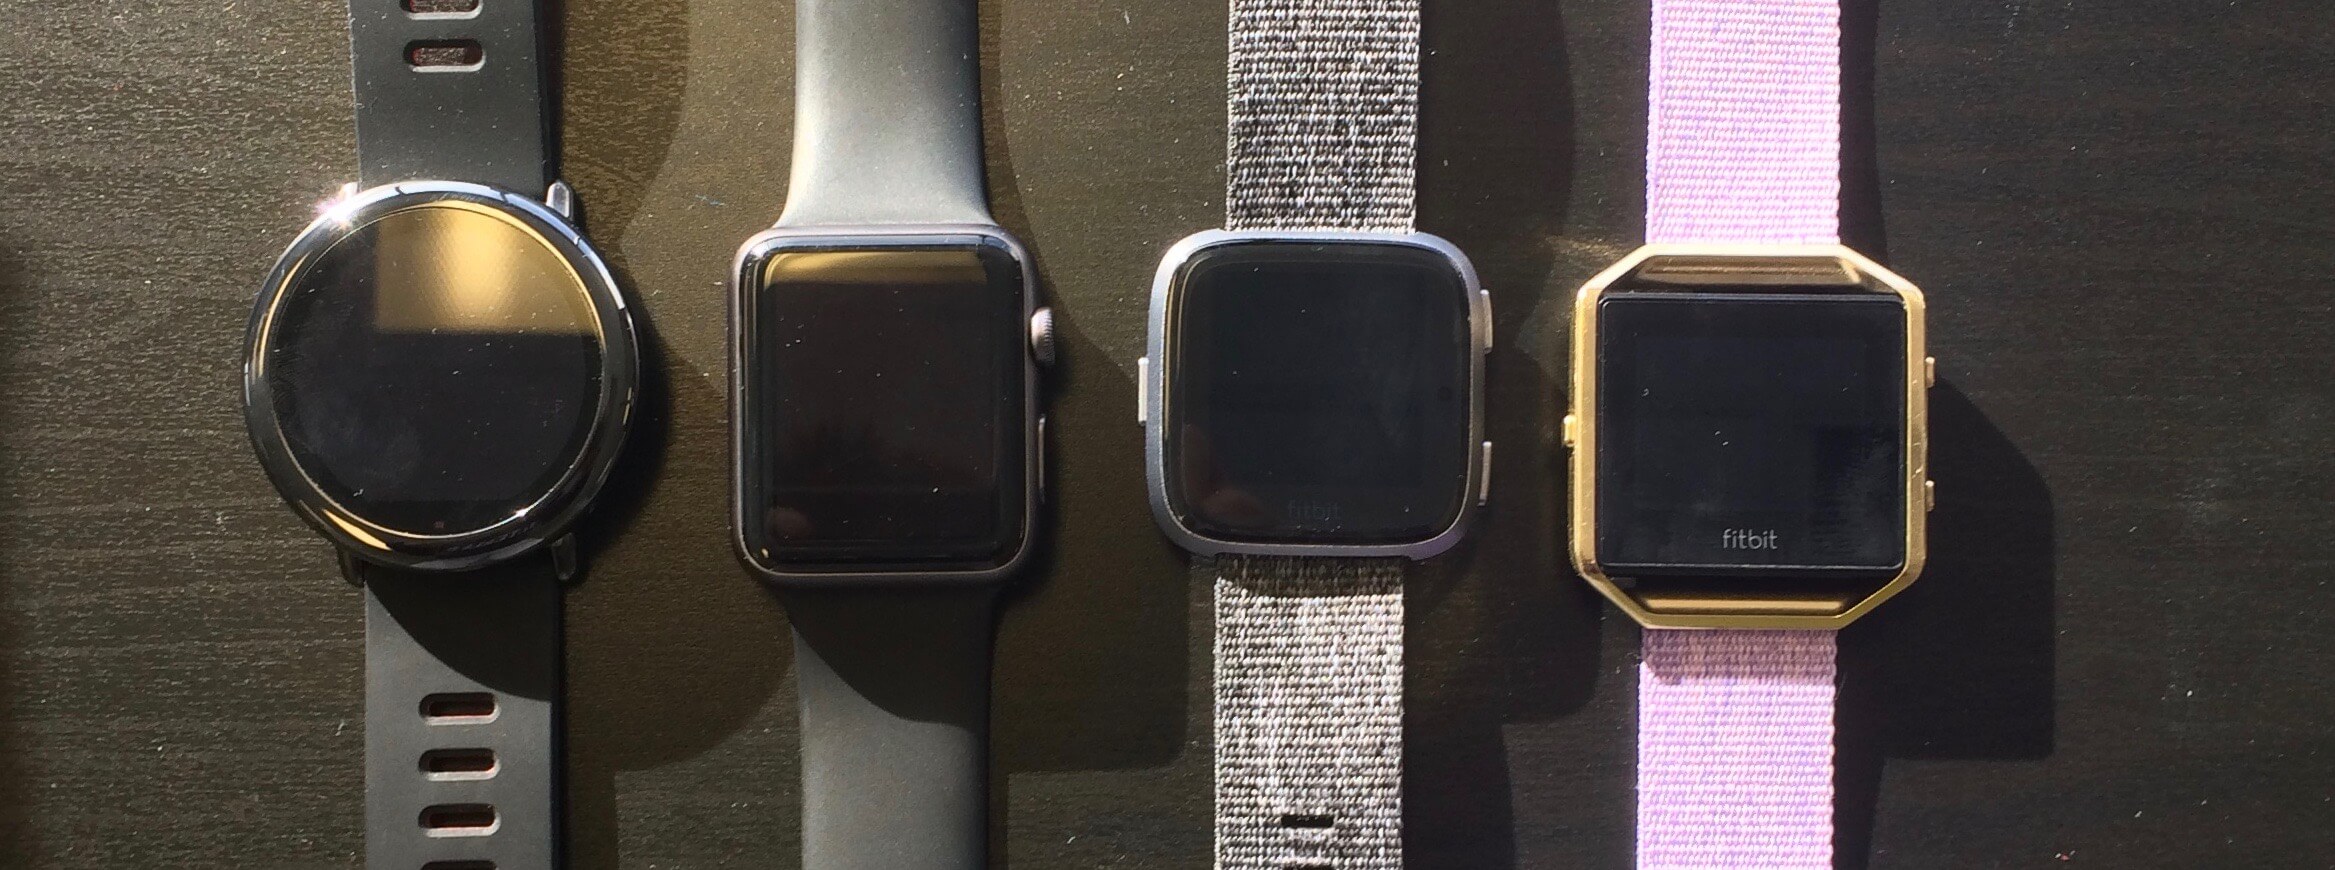 Fitbit Versa compared to Amazfit Pace, Apple Watch, and Fitbit Blaze